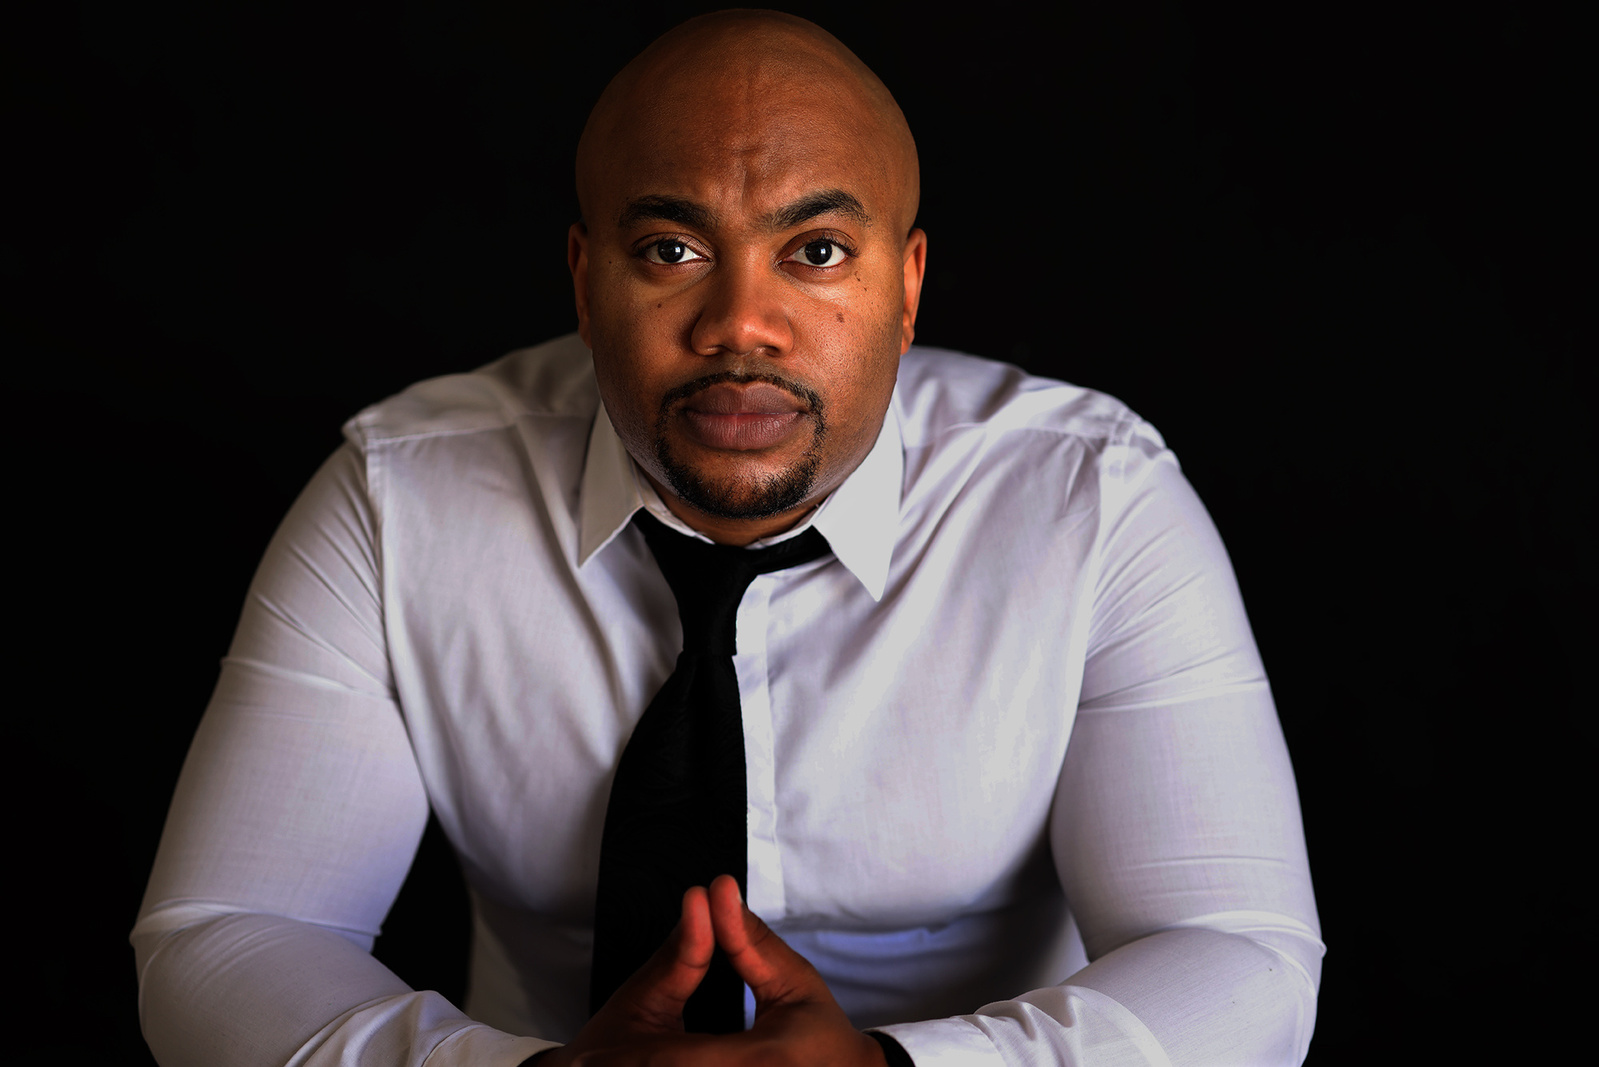 In studio headshot of professional black man in a white dress shirt and black background